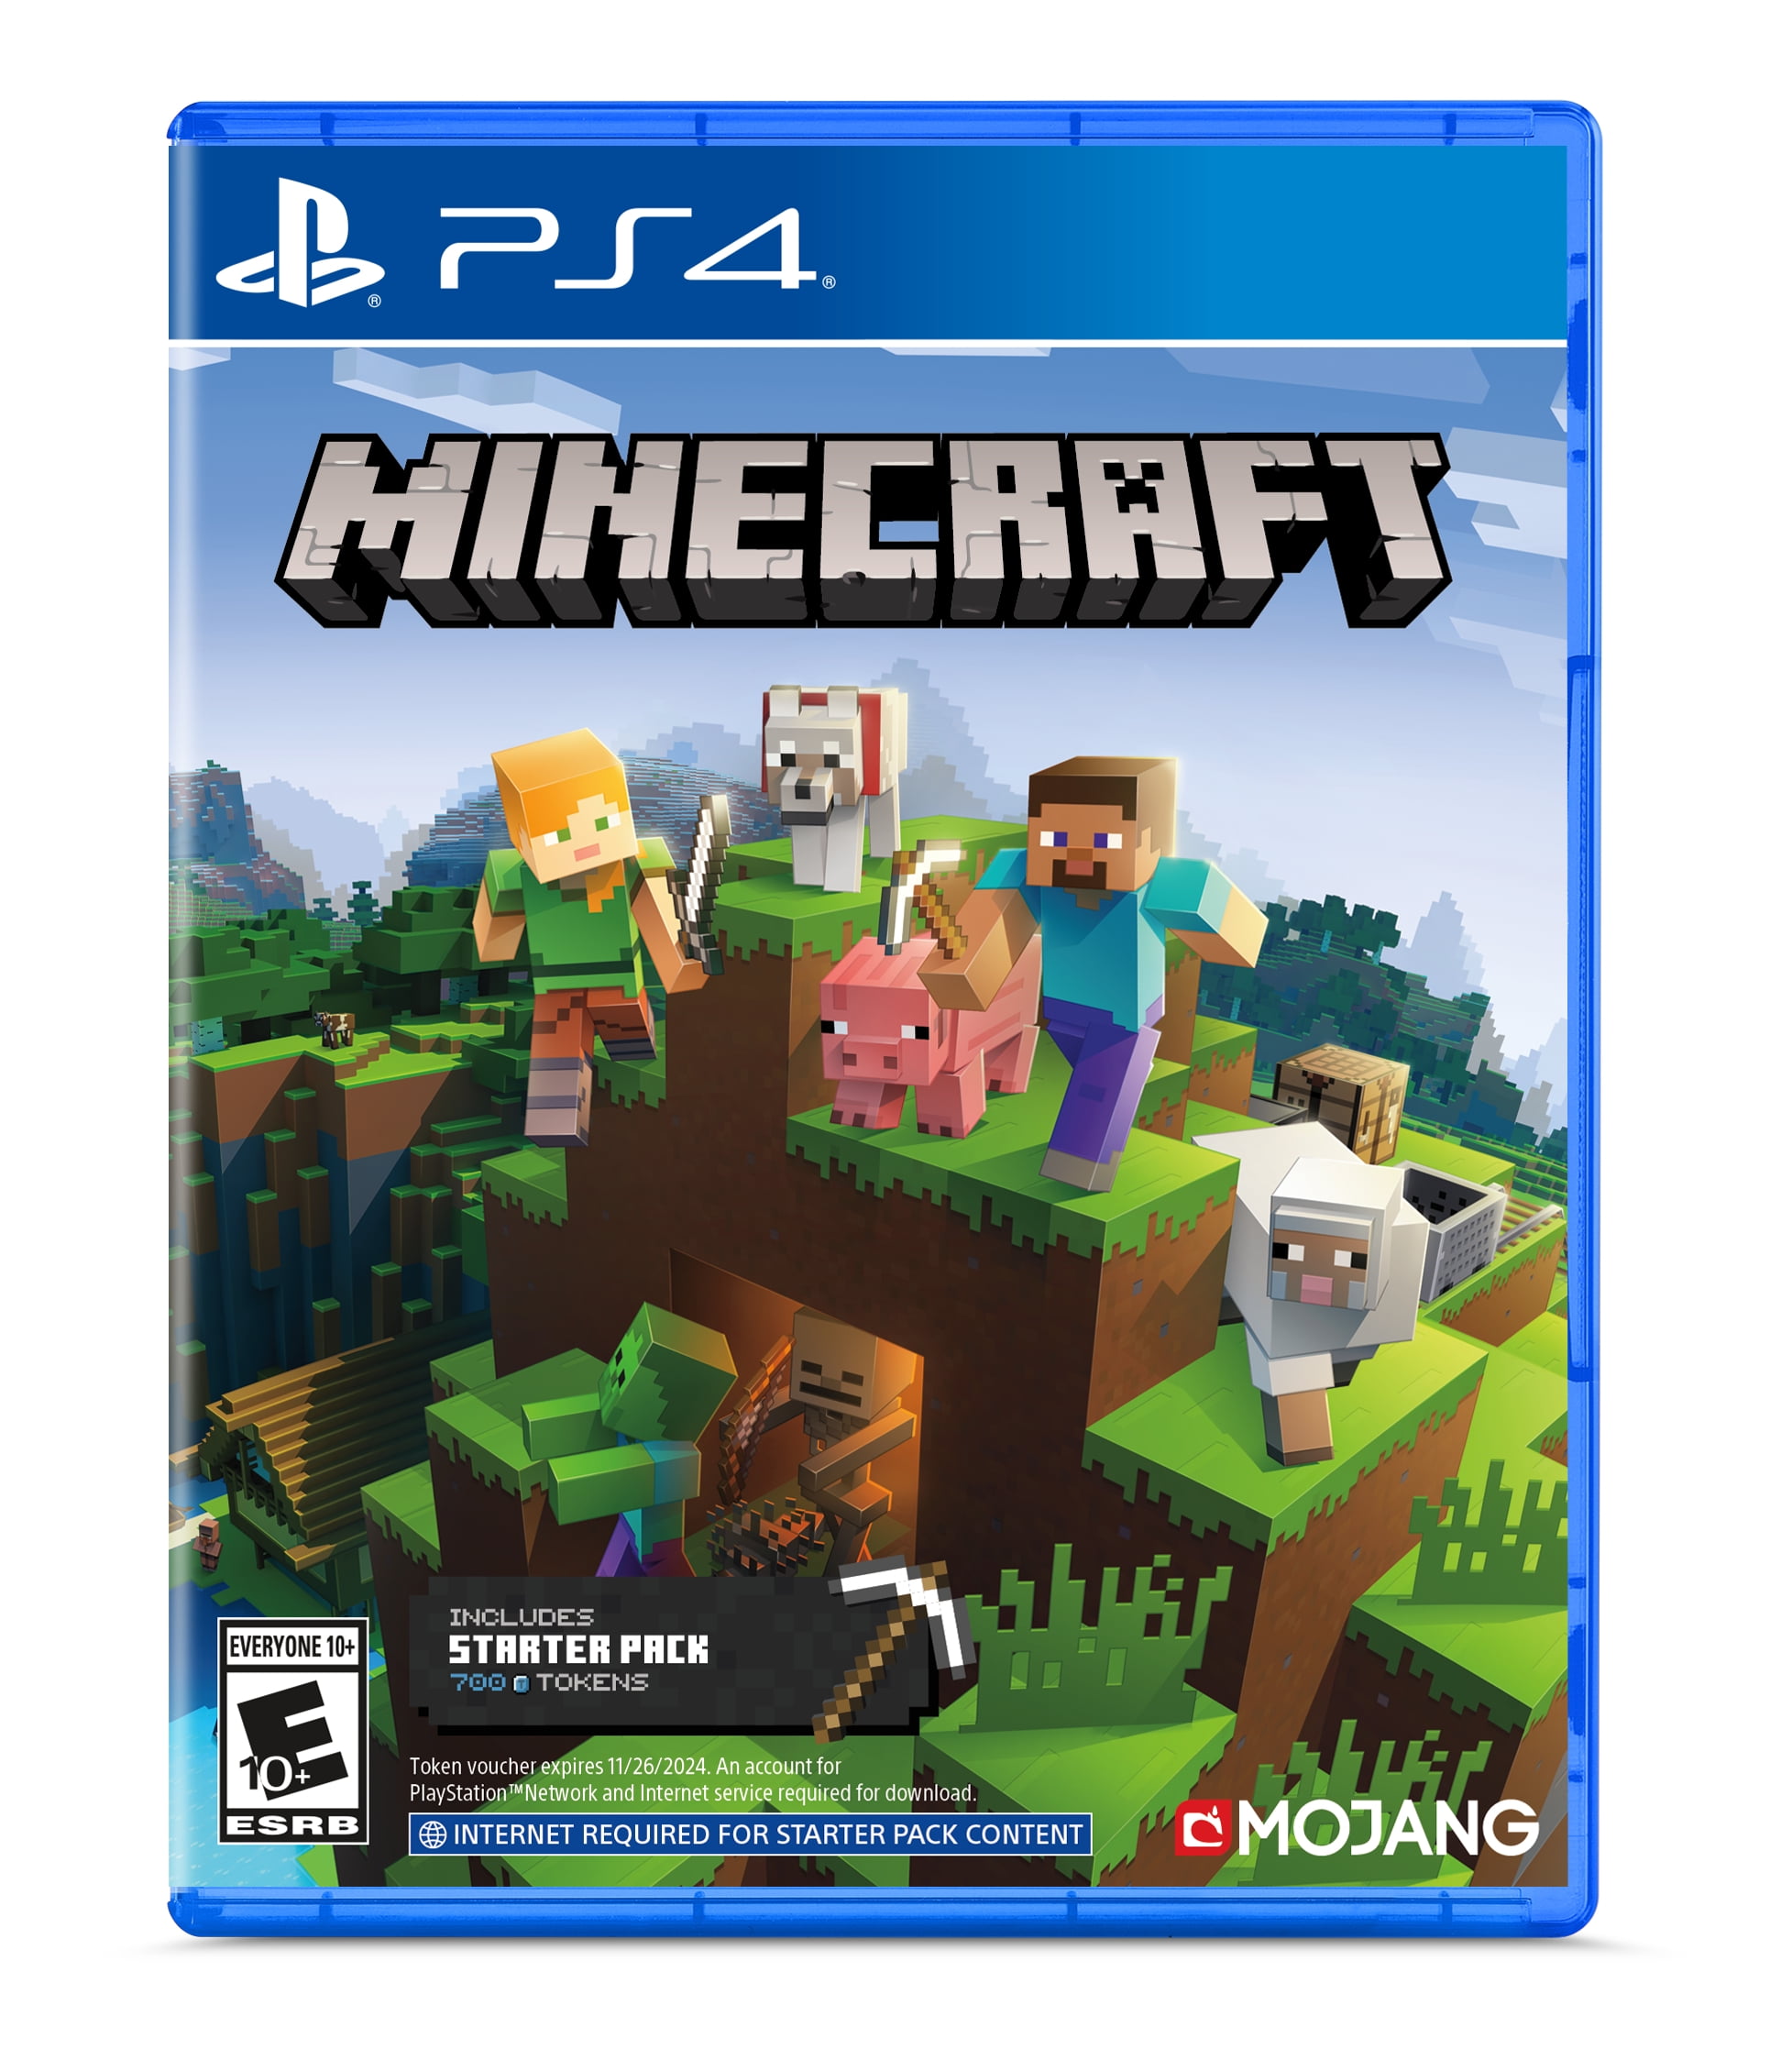 MineCraft Playstation 4 Edition Unboxing!! 